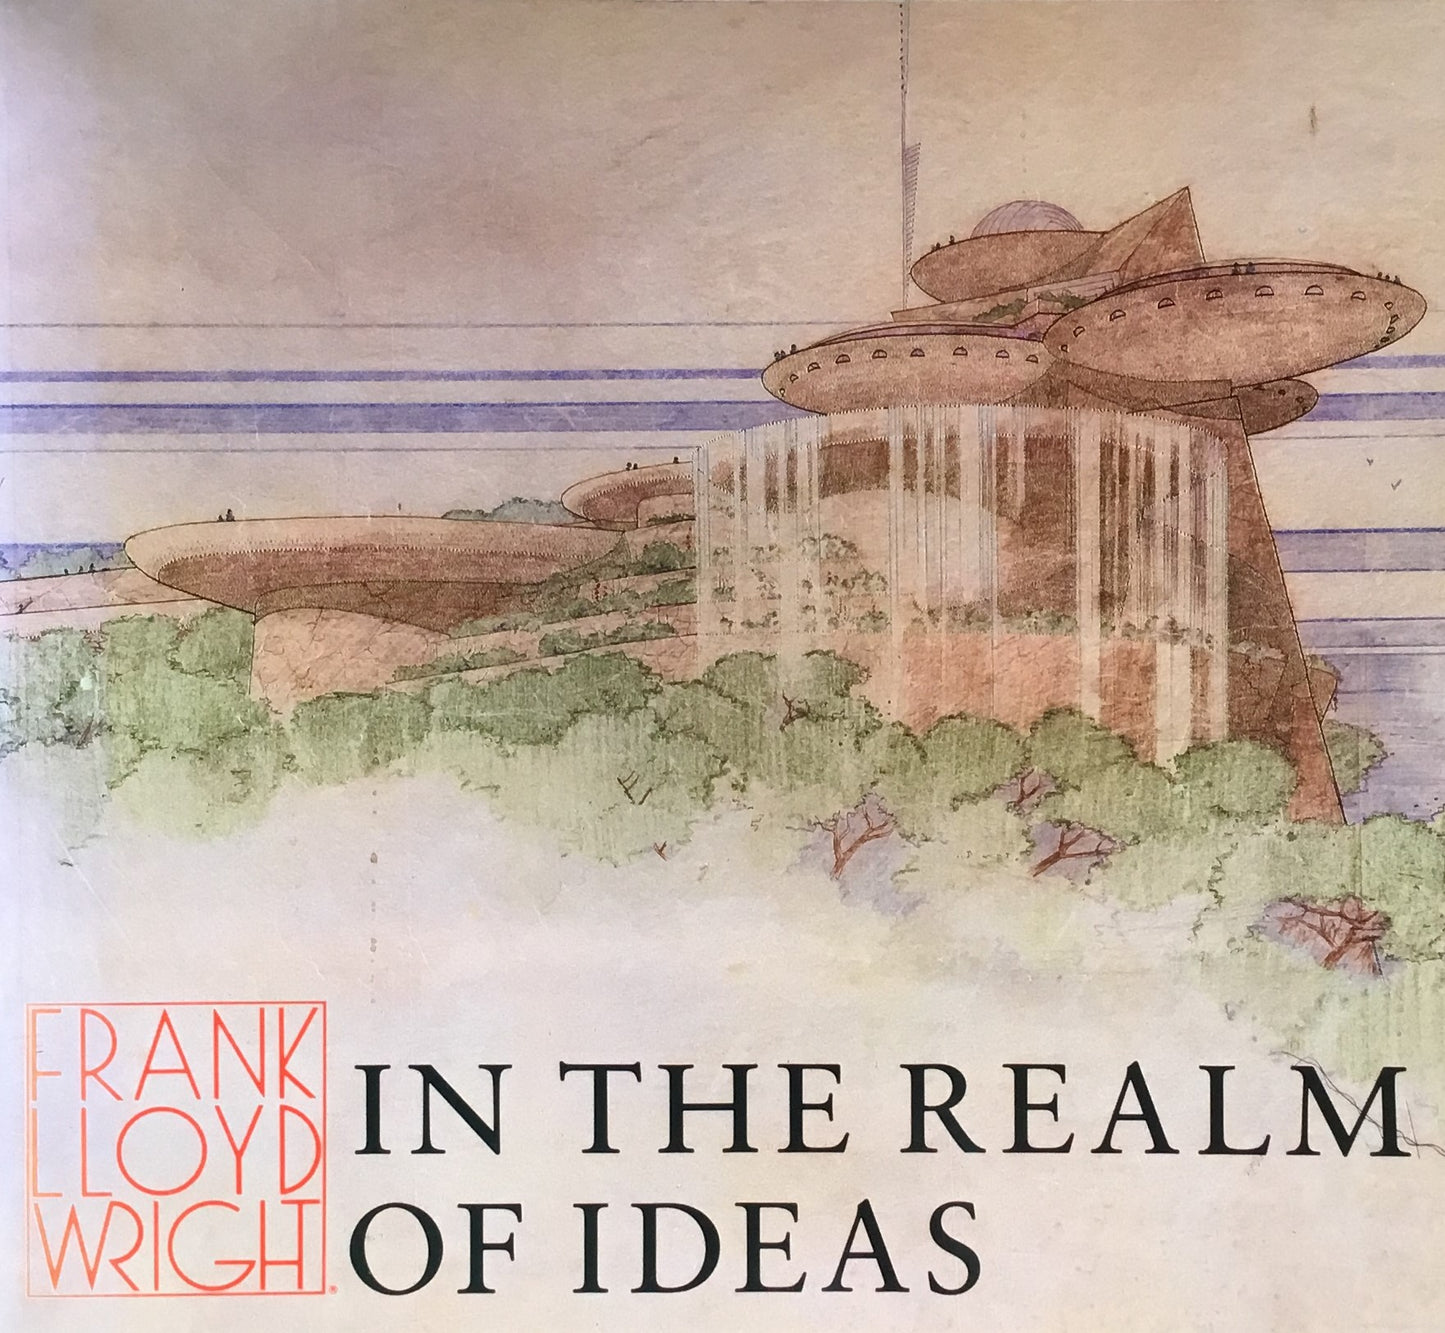 FRANK LLOYD WRIGHT　IN THE REALM OF IDEAS　フランク・ロイド・ライト